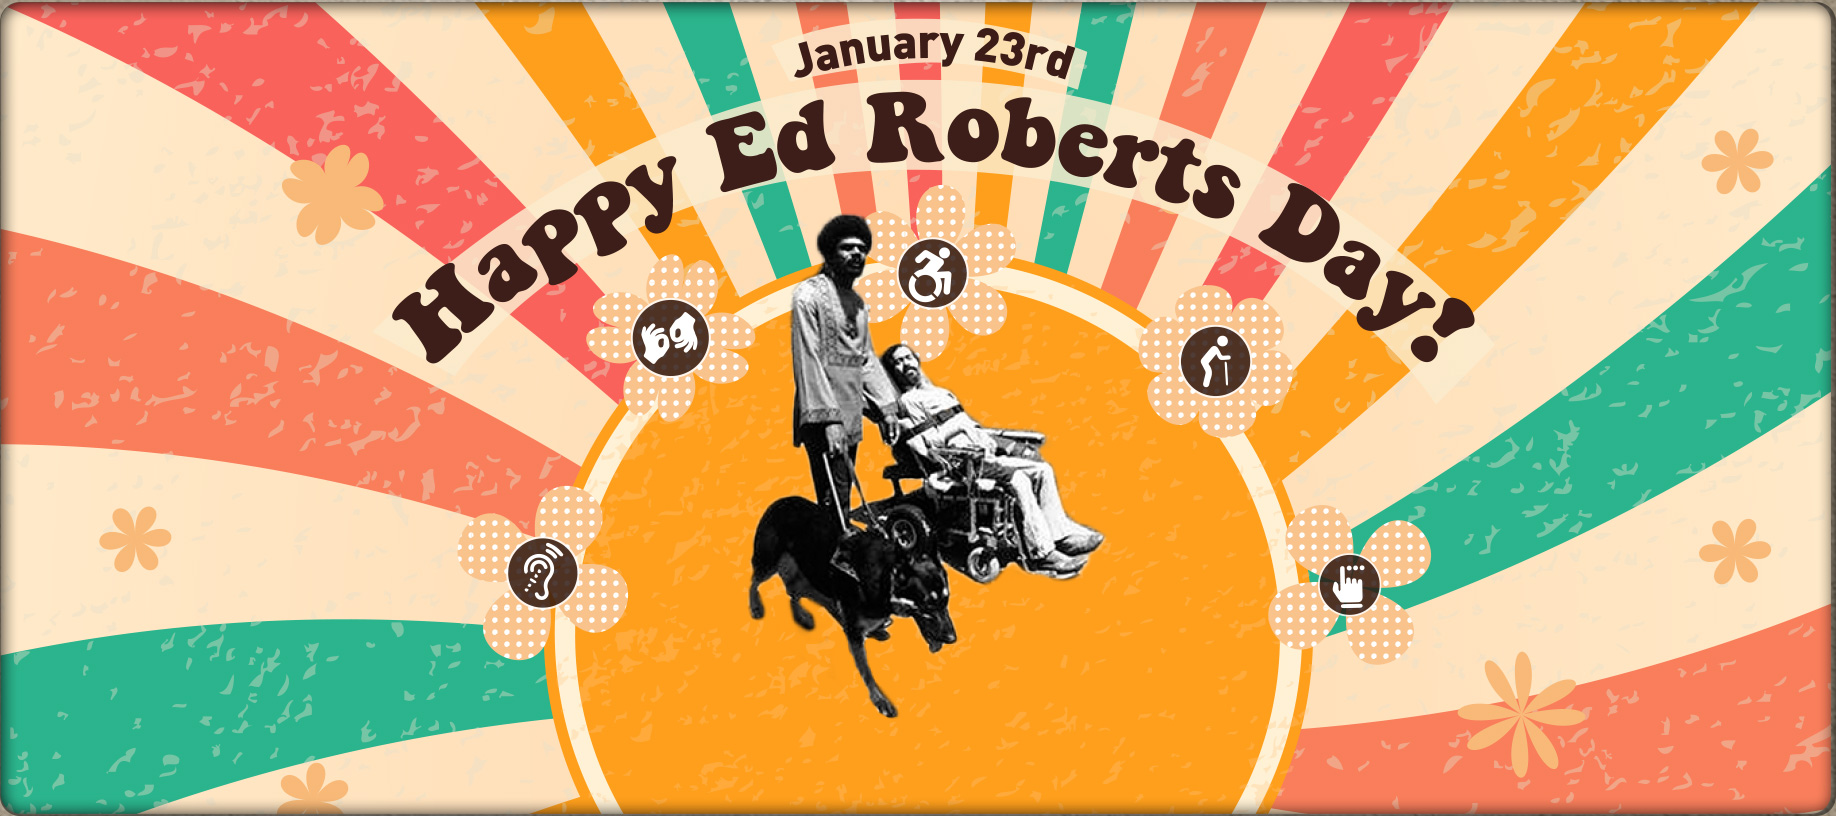 January 23rd. Happy Ed Roberts Day! A retro inspired design with pastel colors and flowers.